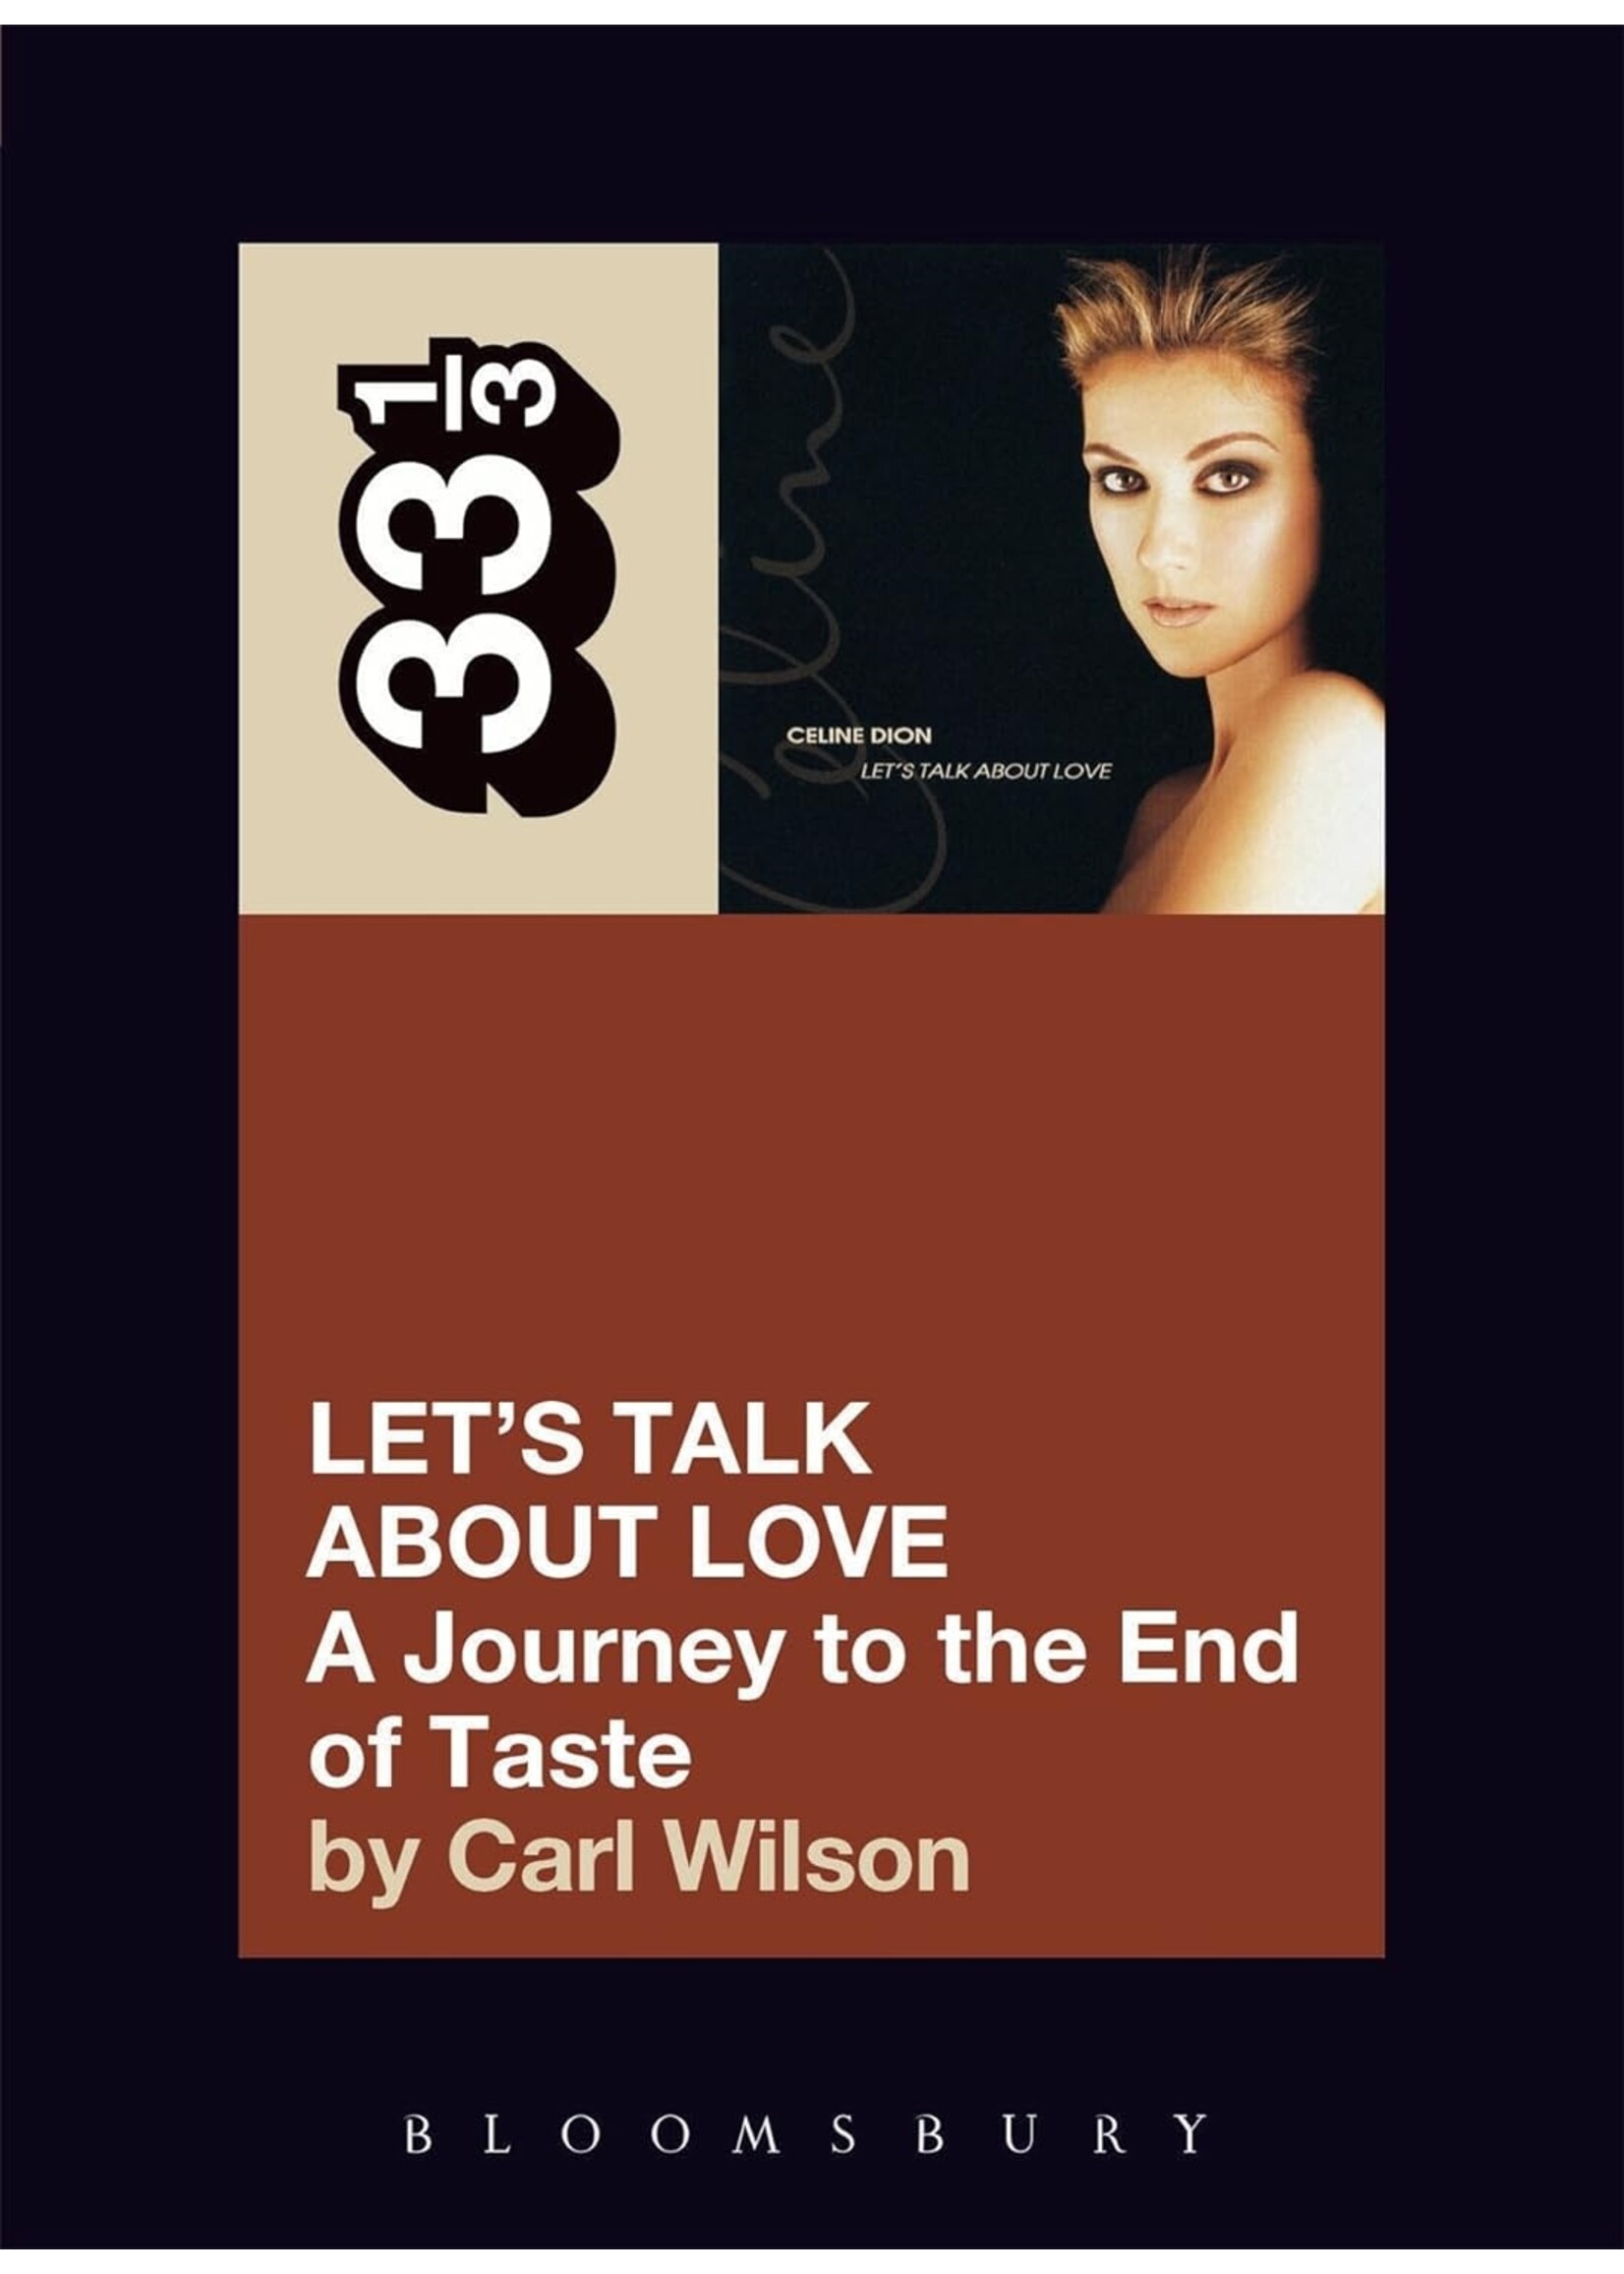 Wilson/Celine Dion's Let's Talk About Love: A Journey to the End of Taste